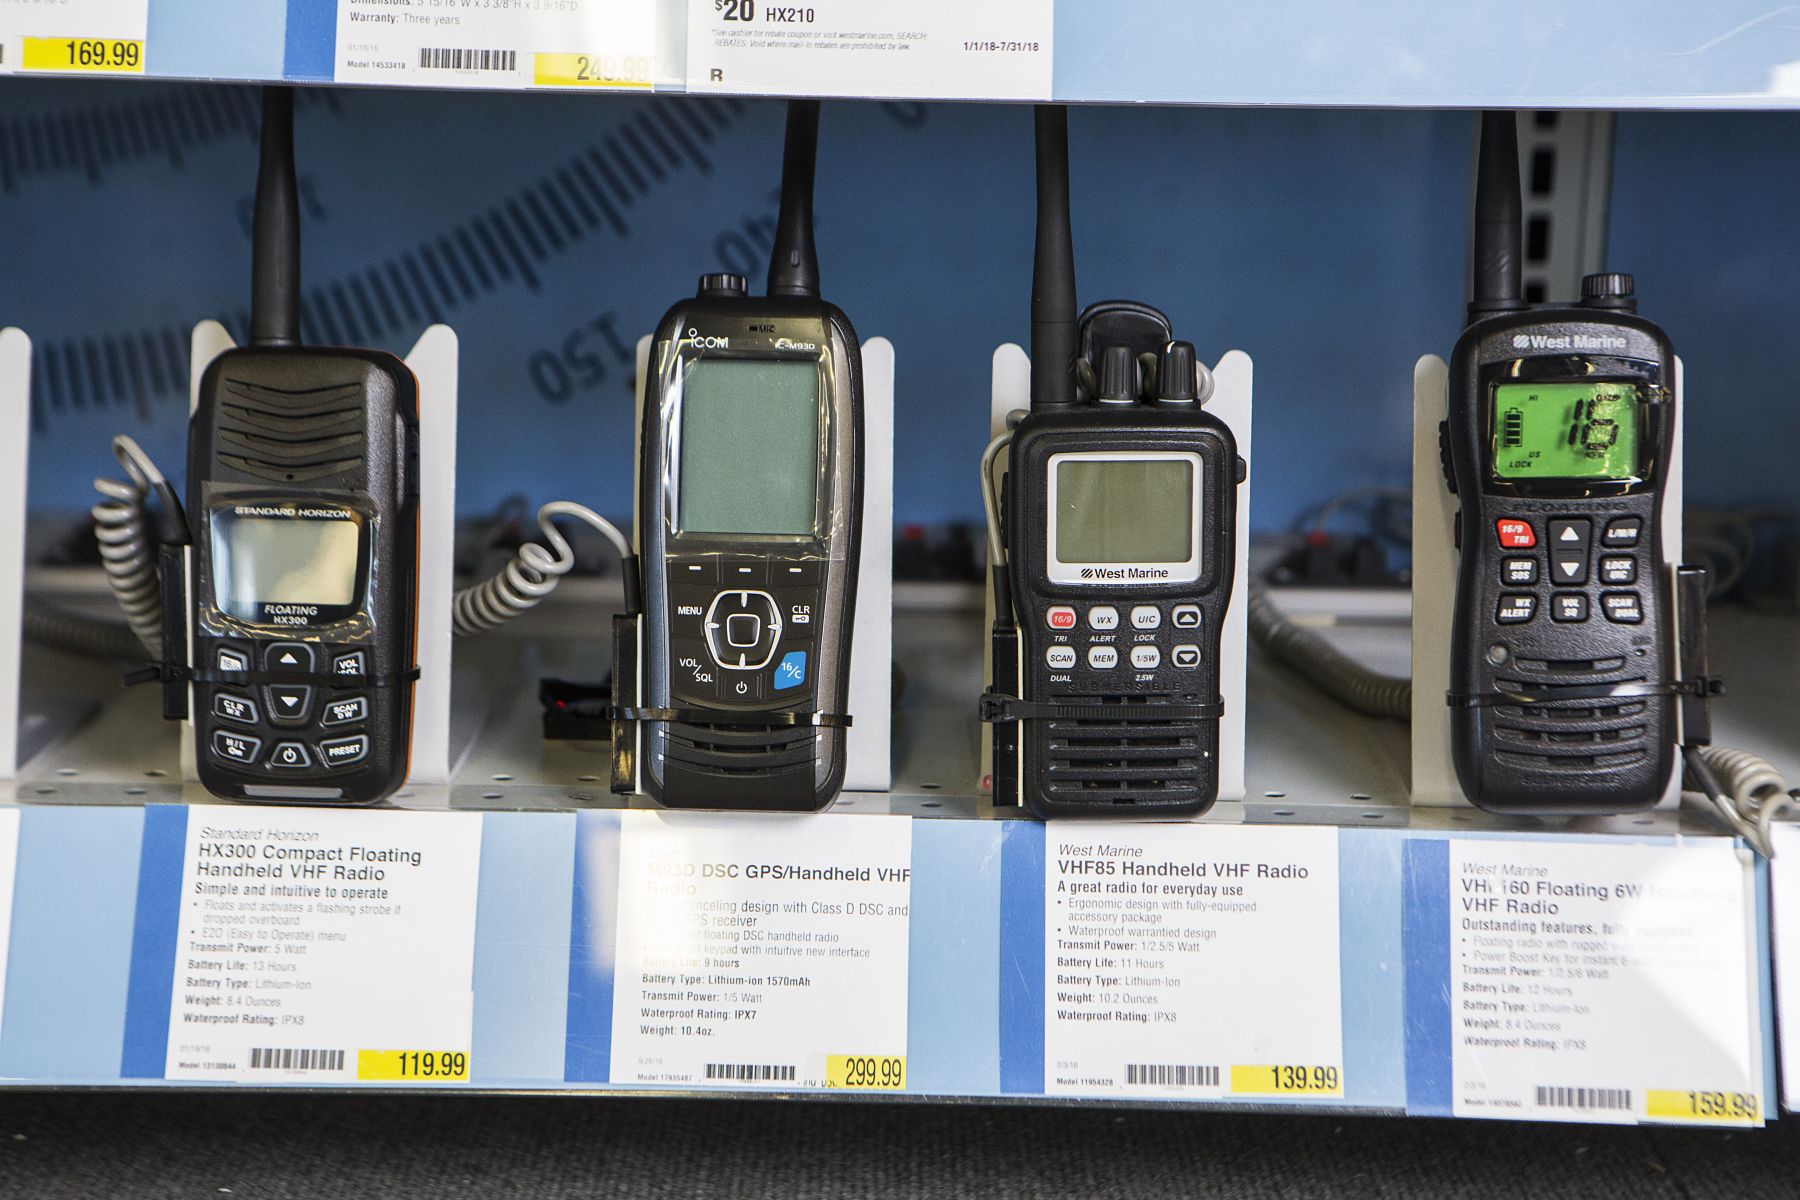 Handheld VHF radios on display at a retail outlet.